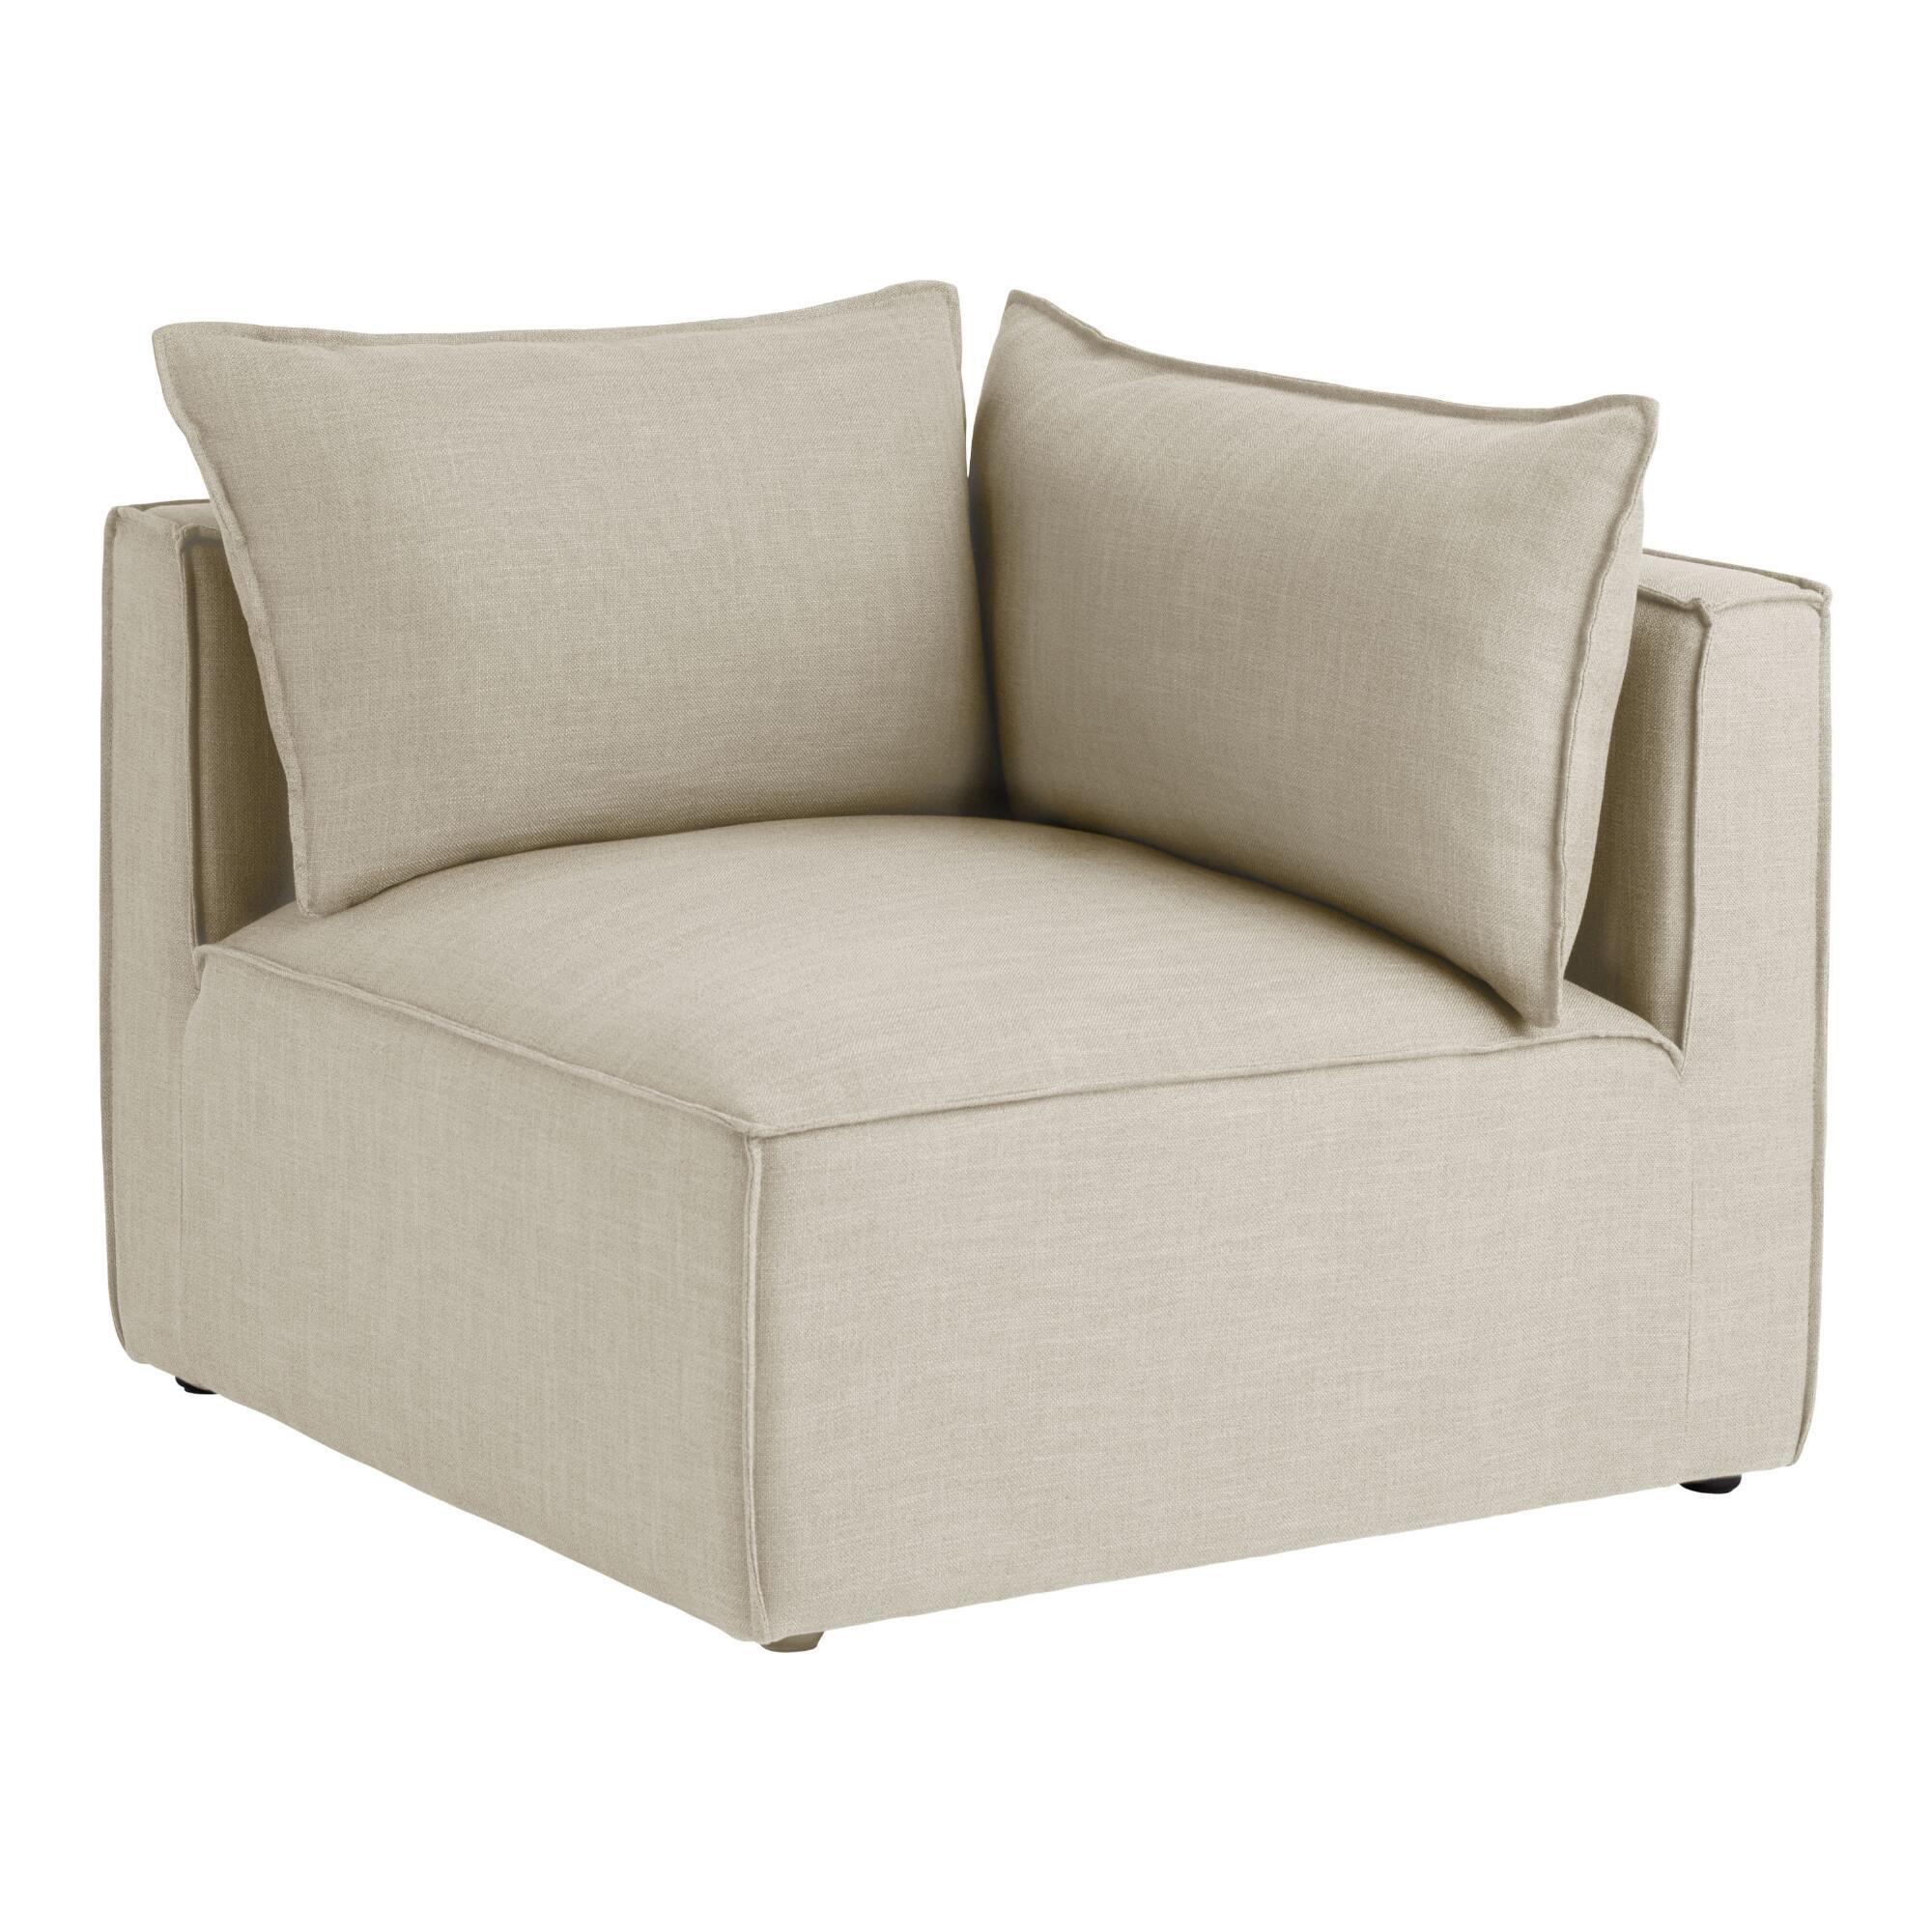 Oatmeal Tyson Modular Sectional Corner End Chair: Natural by World Market